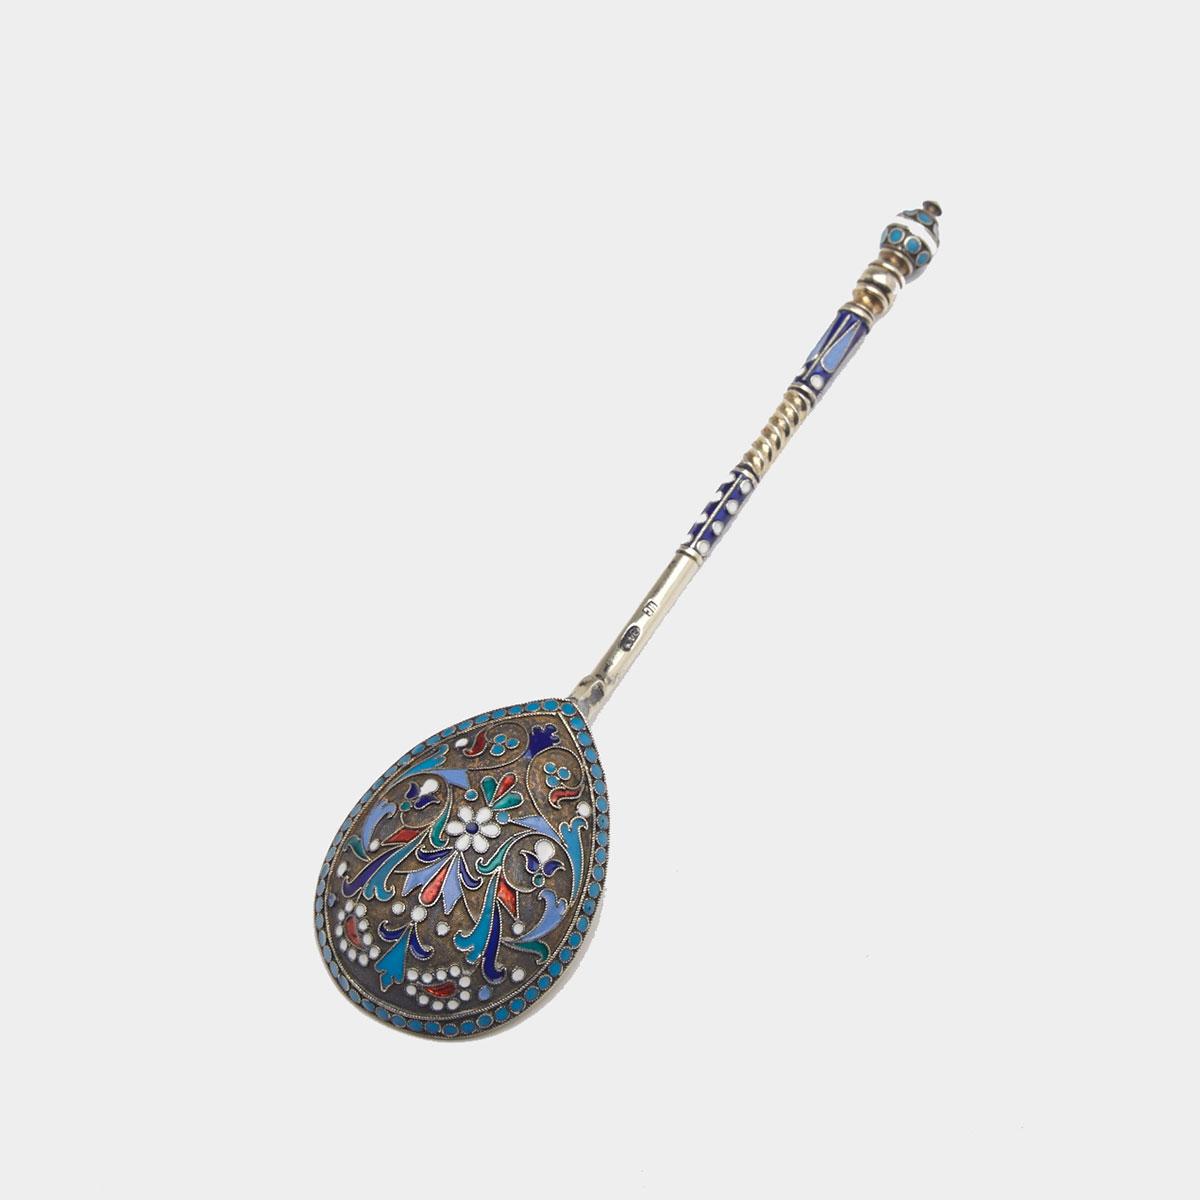 Russian Silver-Gilt and Cloisonné Enamel Spoon, Moscow, late 19th century